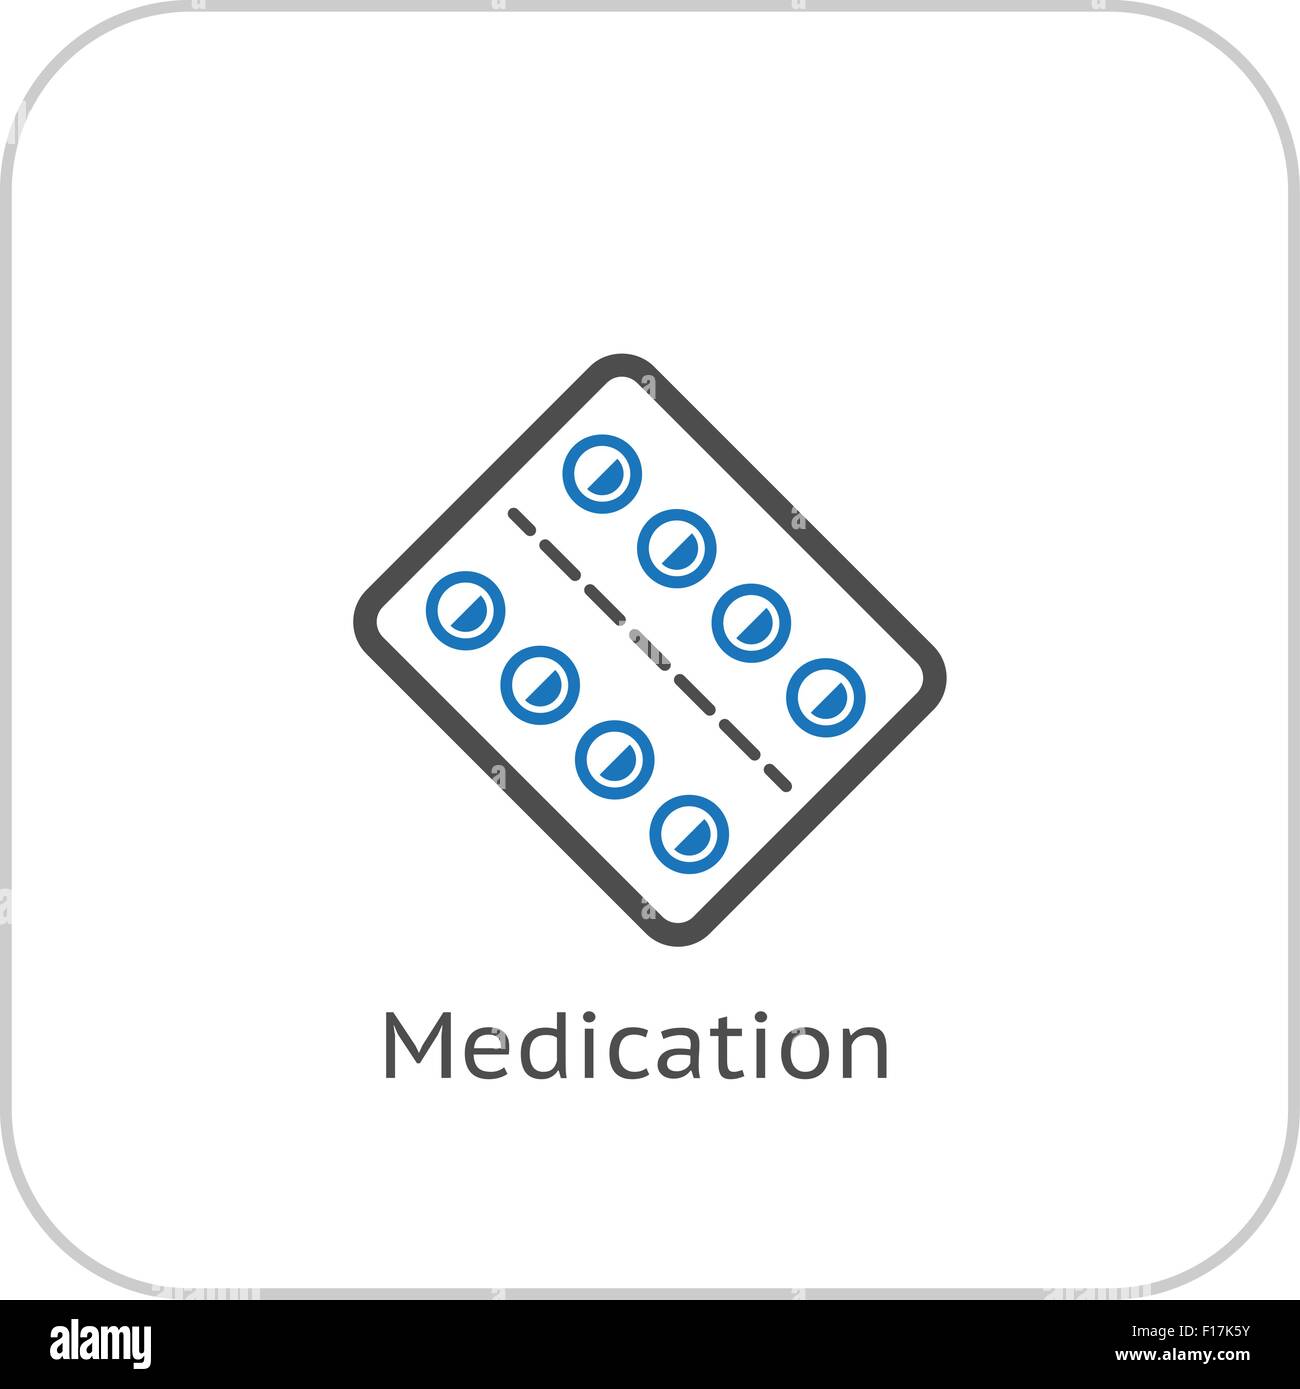 Medication and Medical Services Icon. Flat Design. Stock Vector